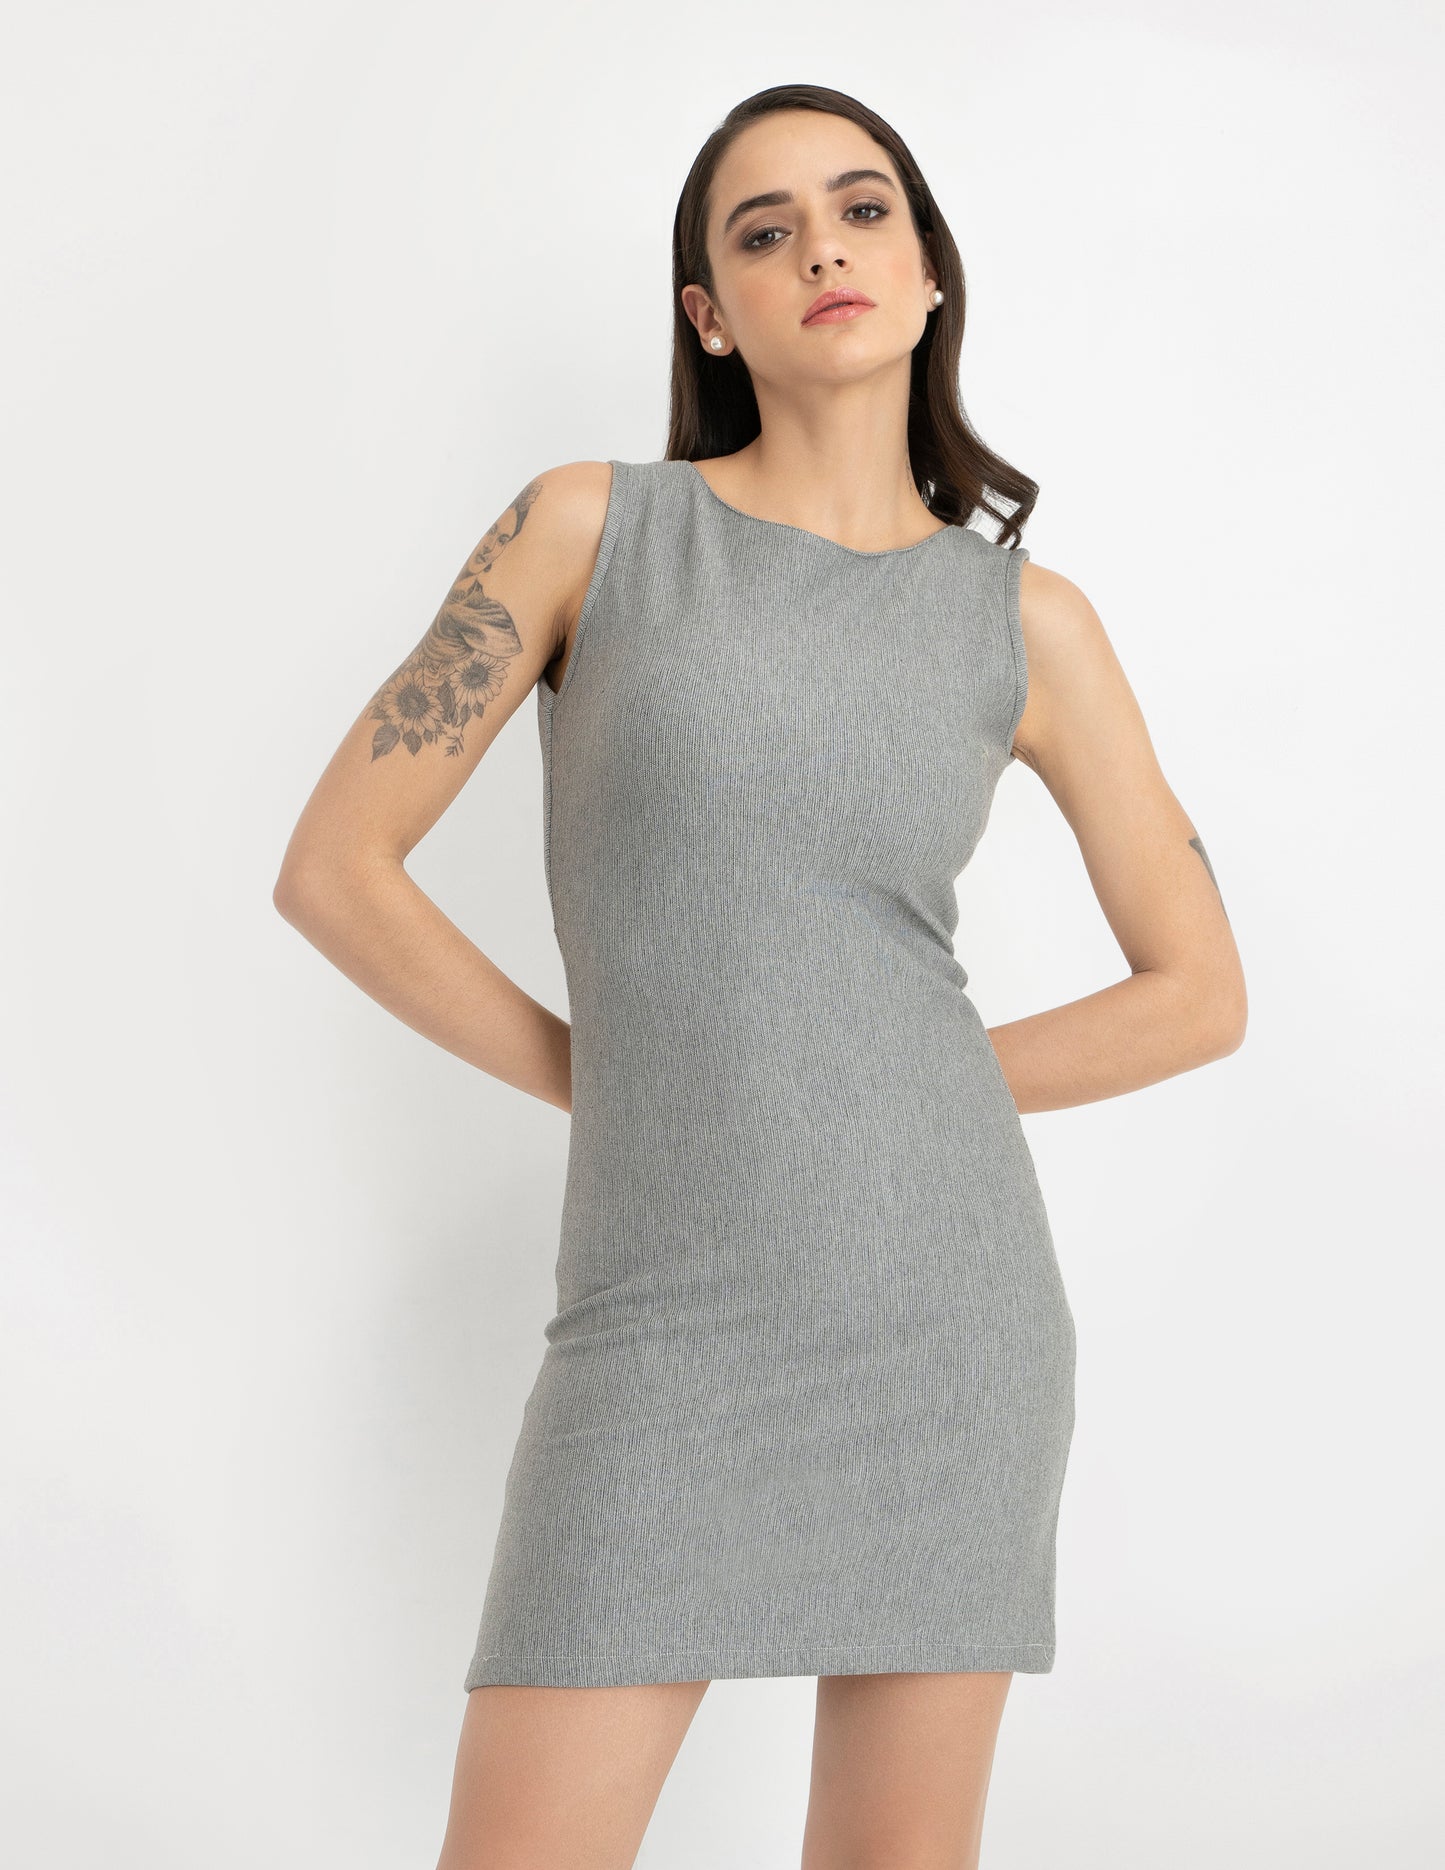 DYLAN BACK KNOTTED BODYCON DRESS